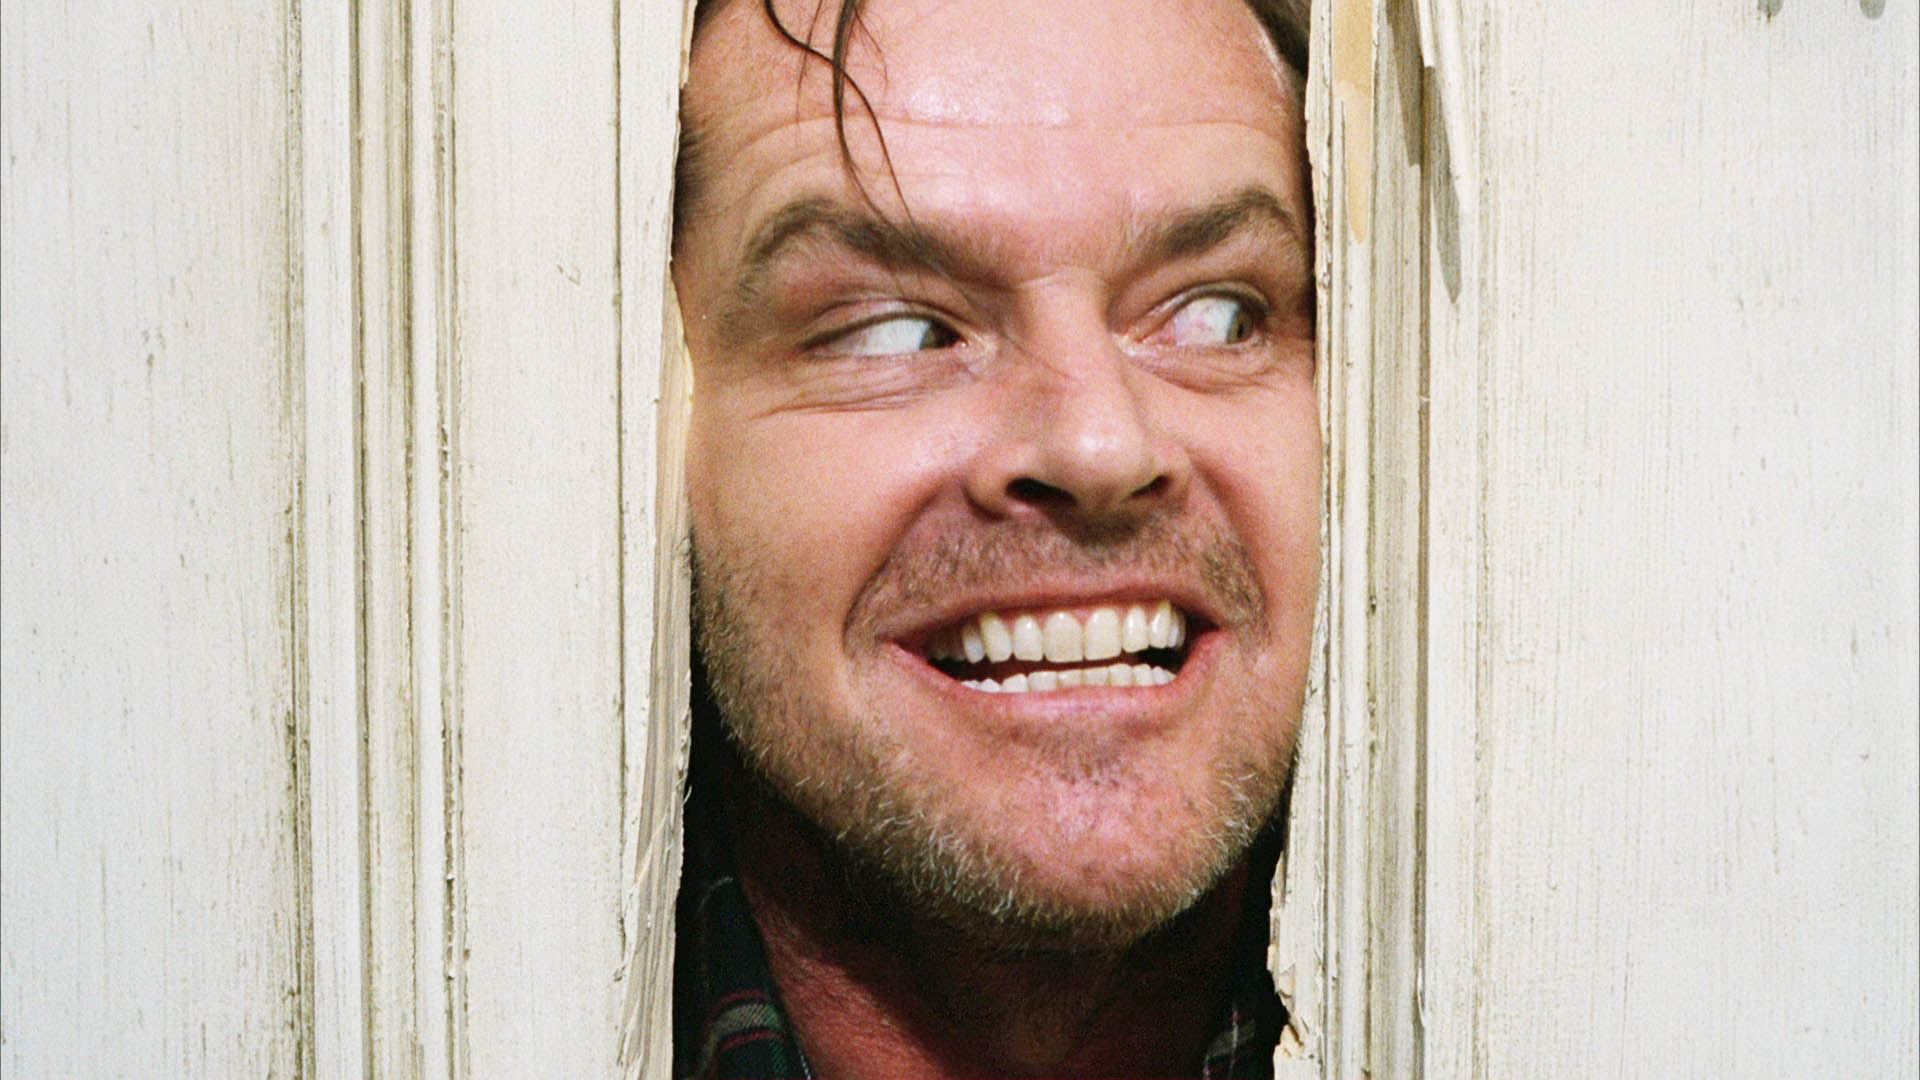 The-Shining-movies-on-Amazon-Prime